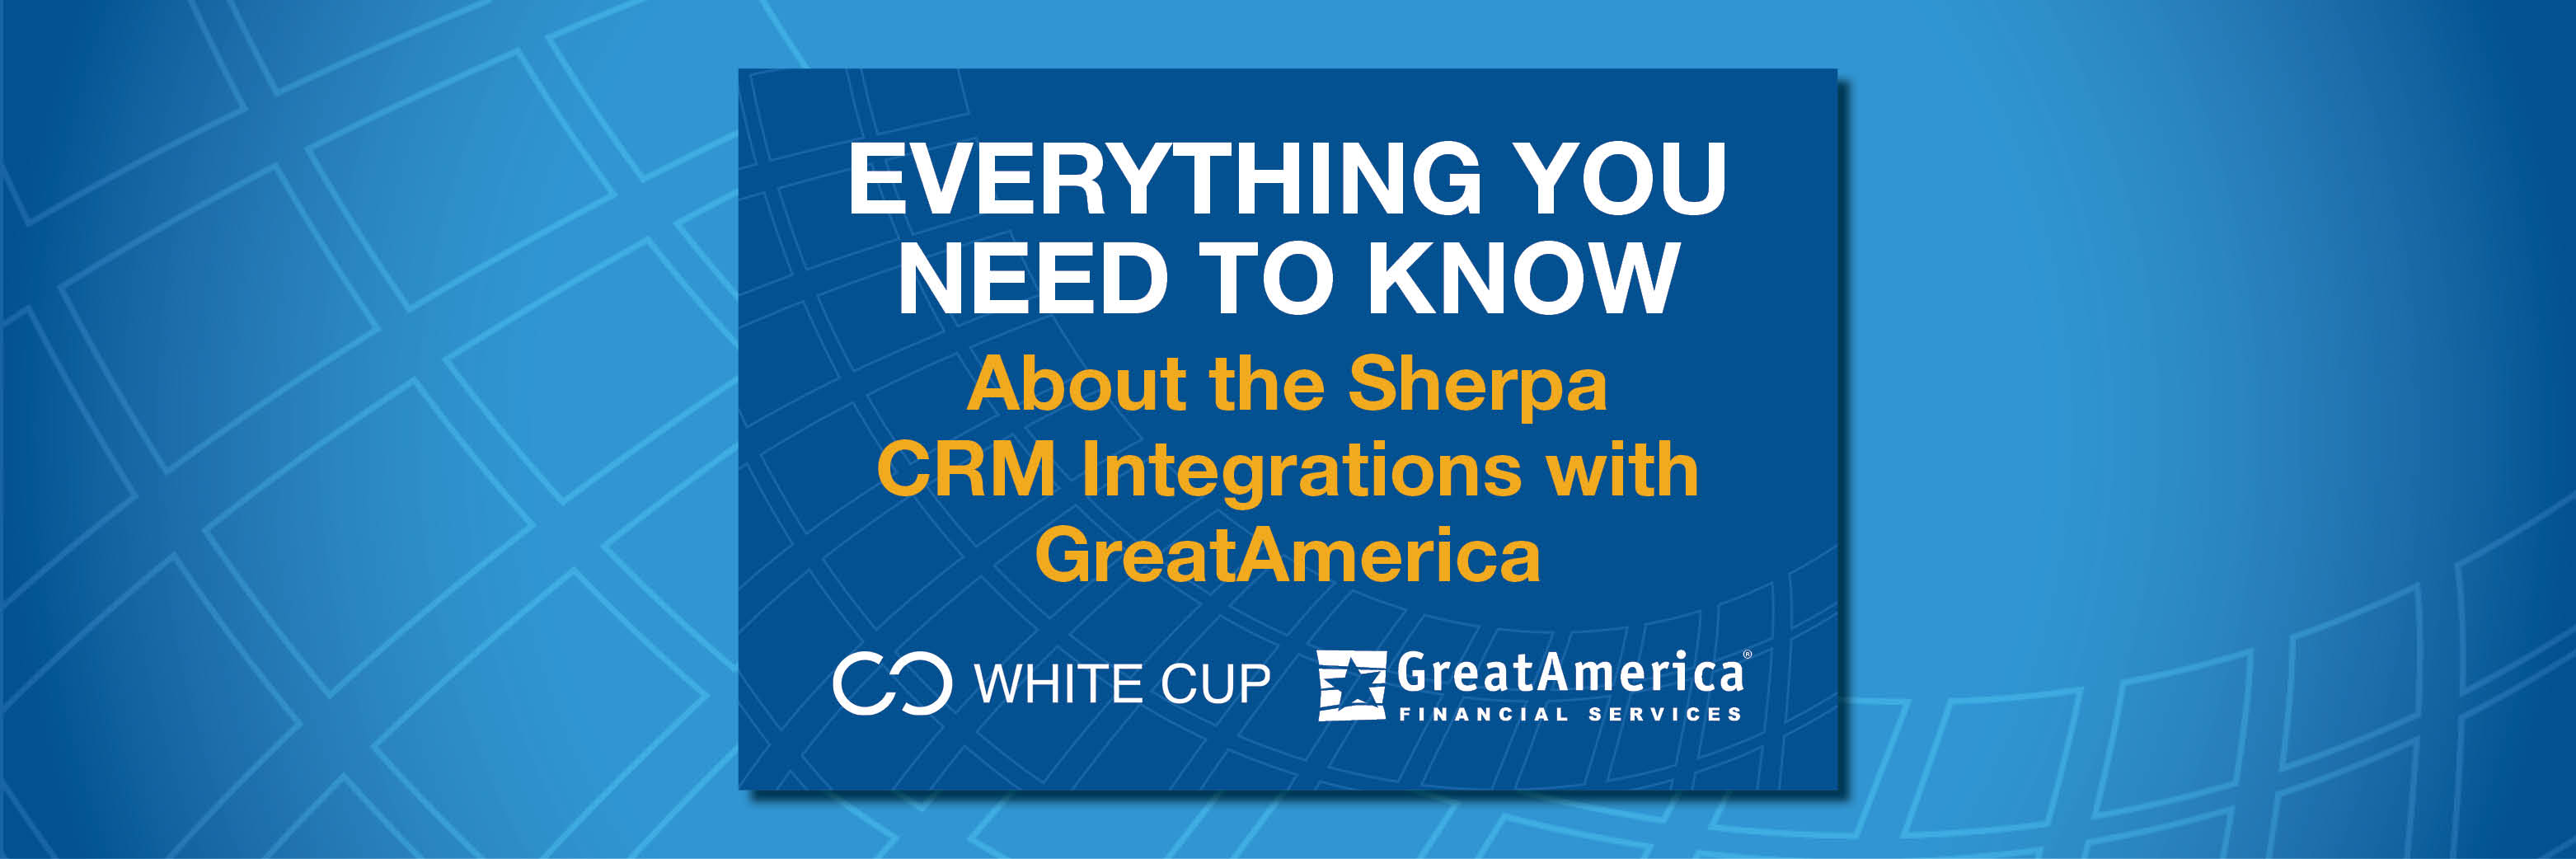 What To Know About the Sherpa CRM Integrations